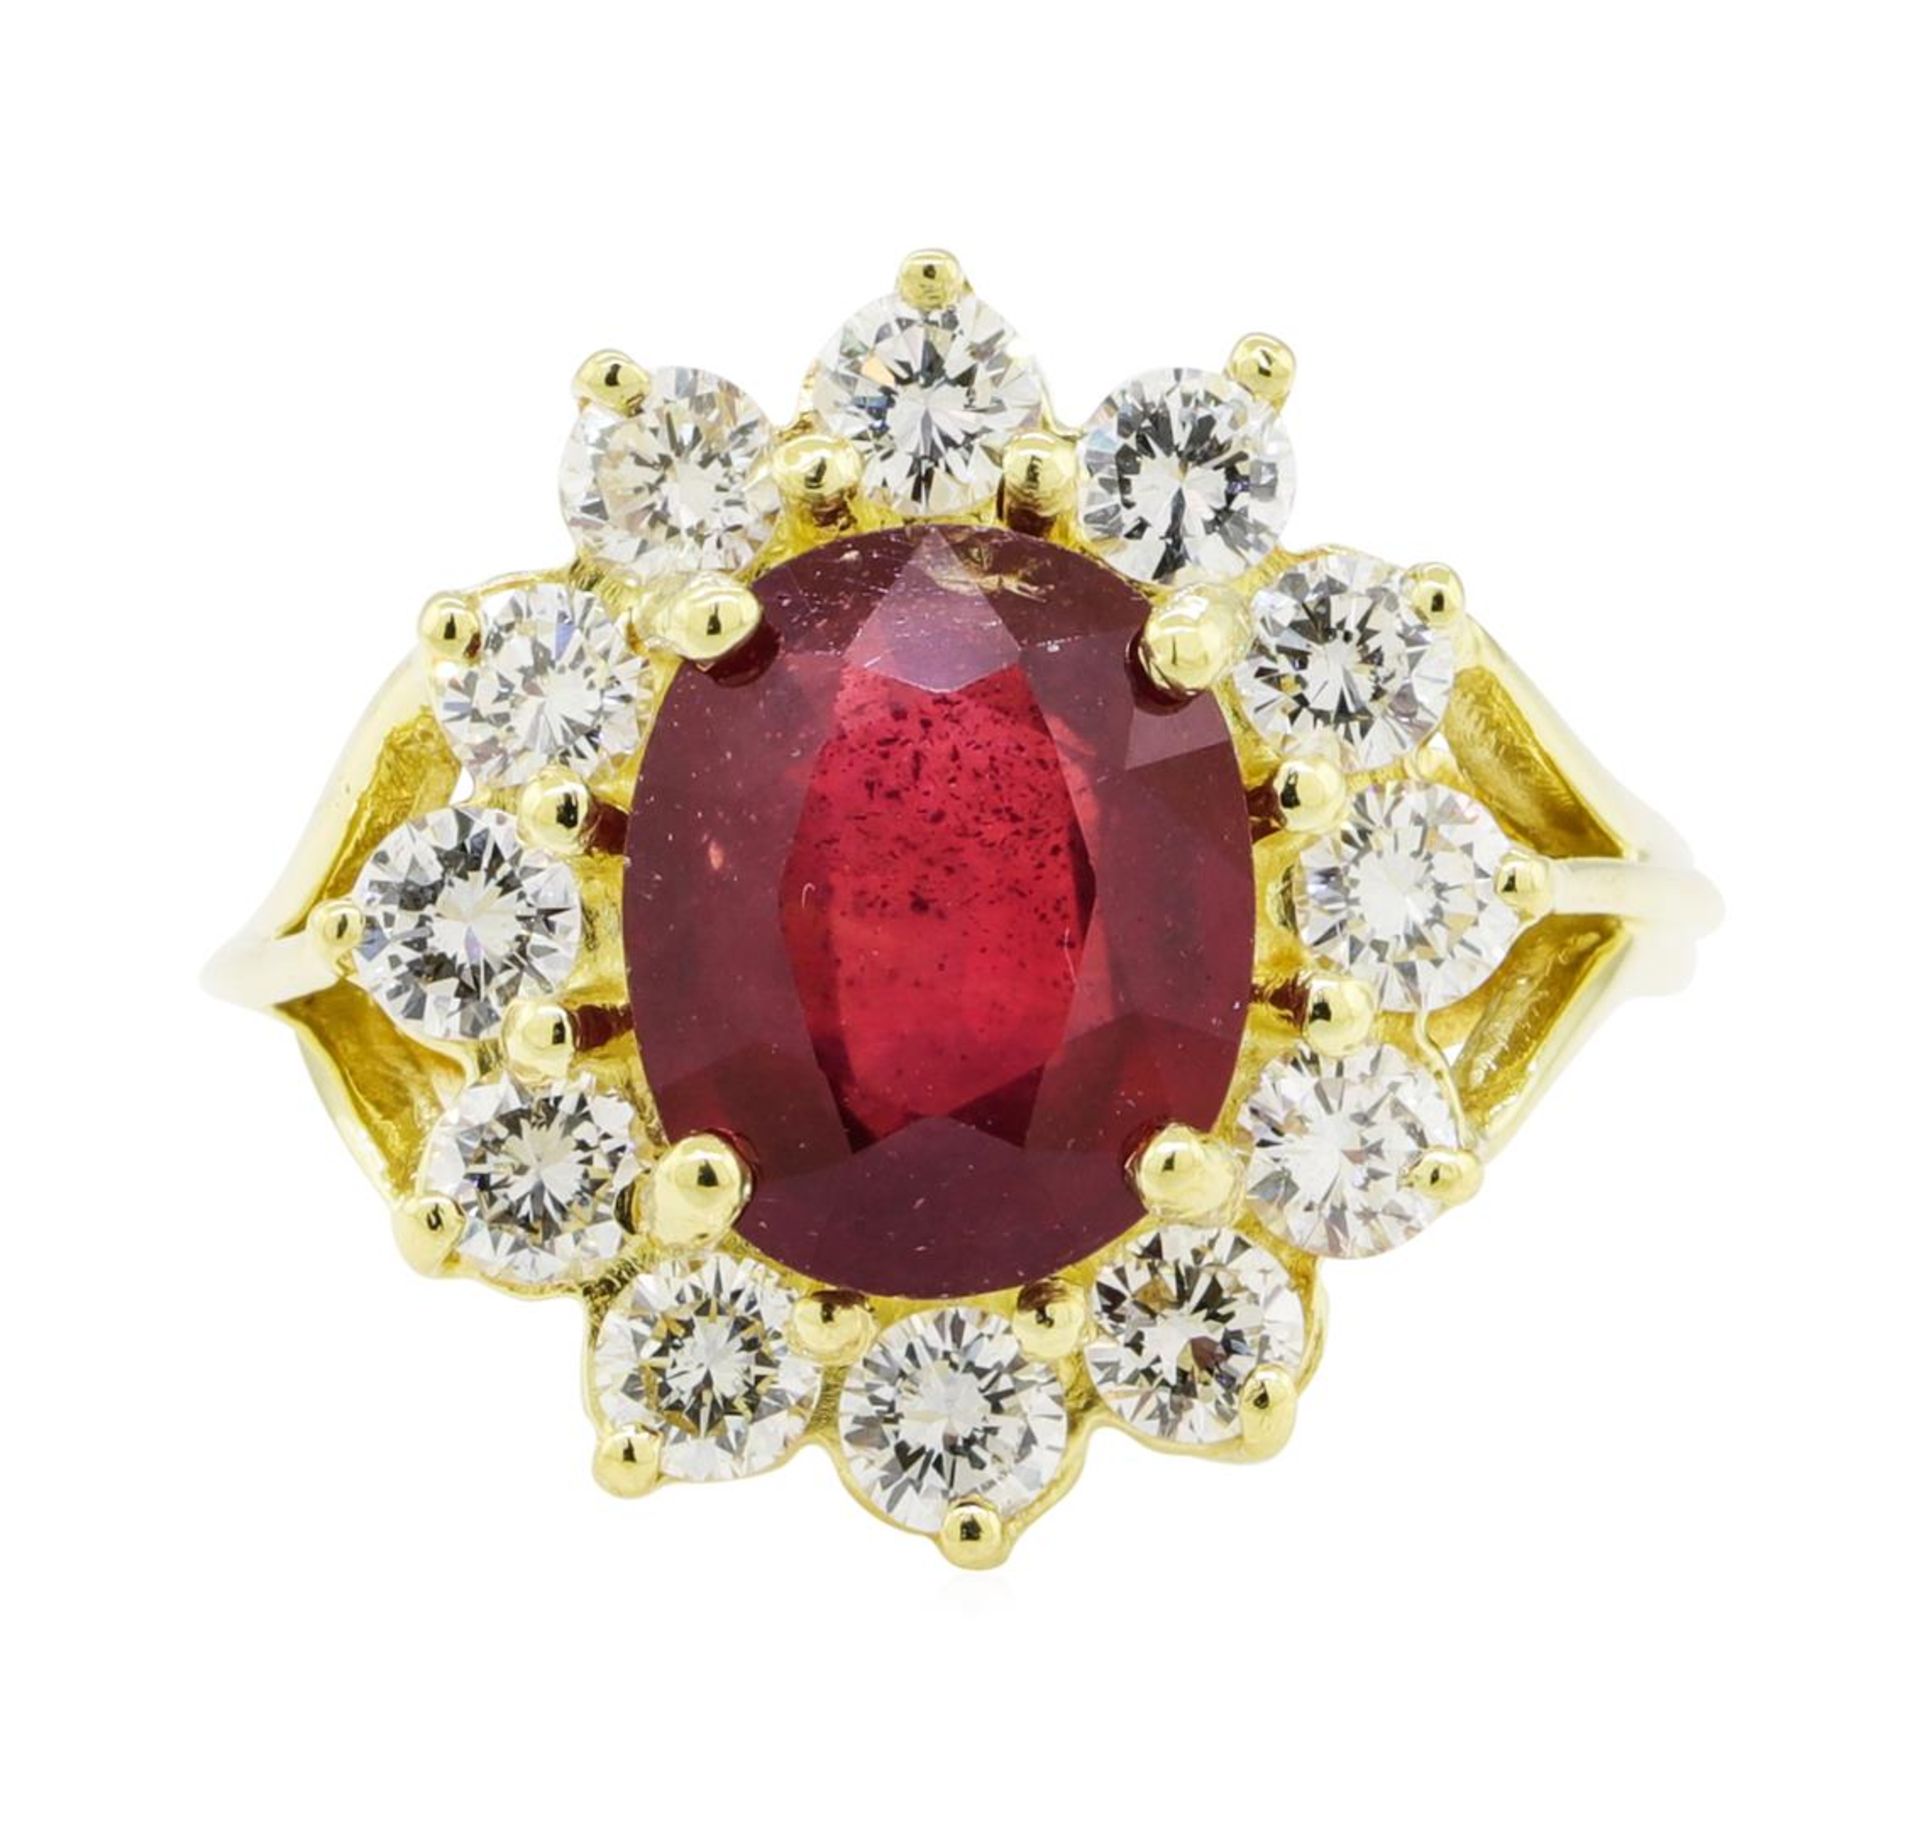 5.51 ctw Ruby and Diamond Ring - 18KT Yellow Gold - Image 2 of 5